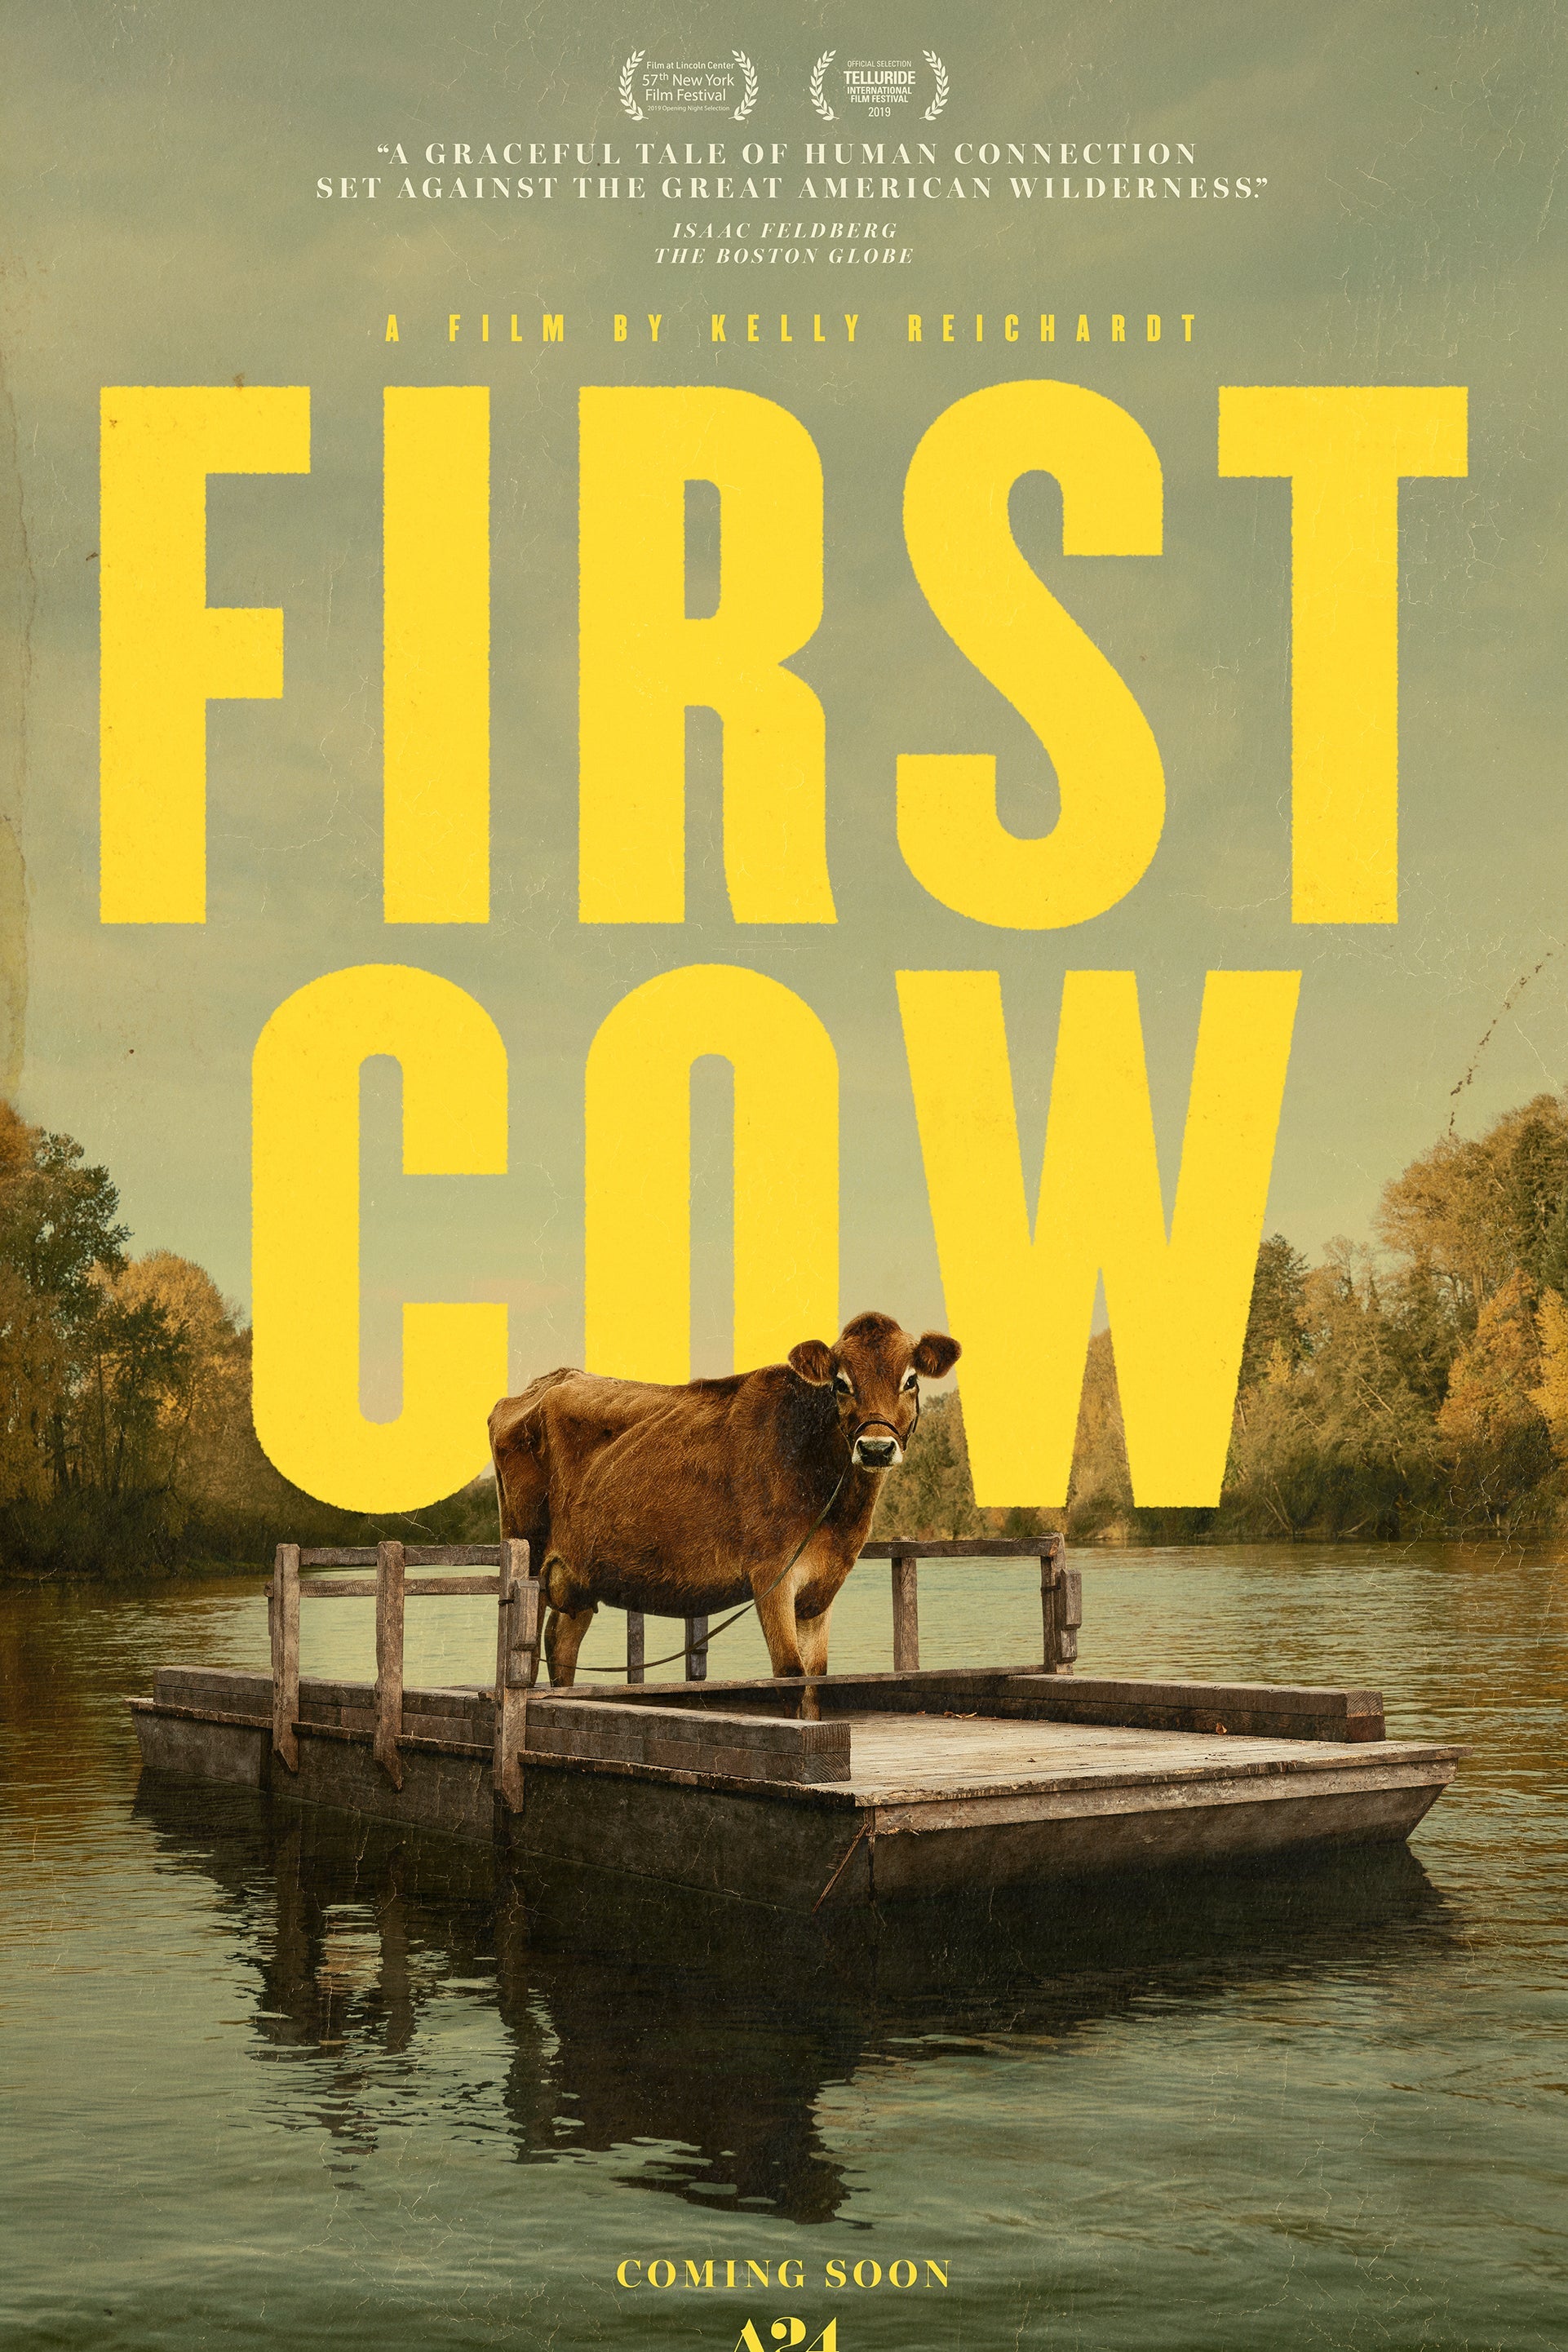 First Cow movie poster. Eve stands on a raft over calm waters, looming in front of the words "First Cow."